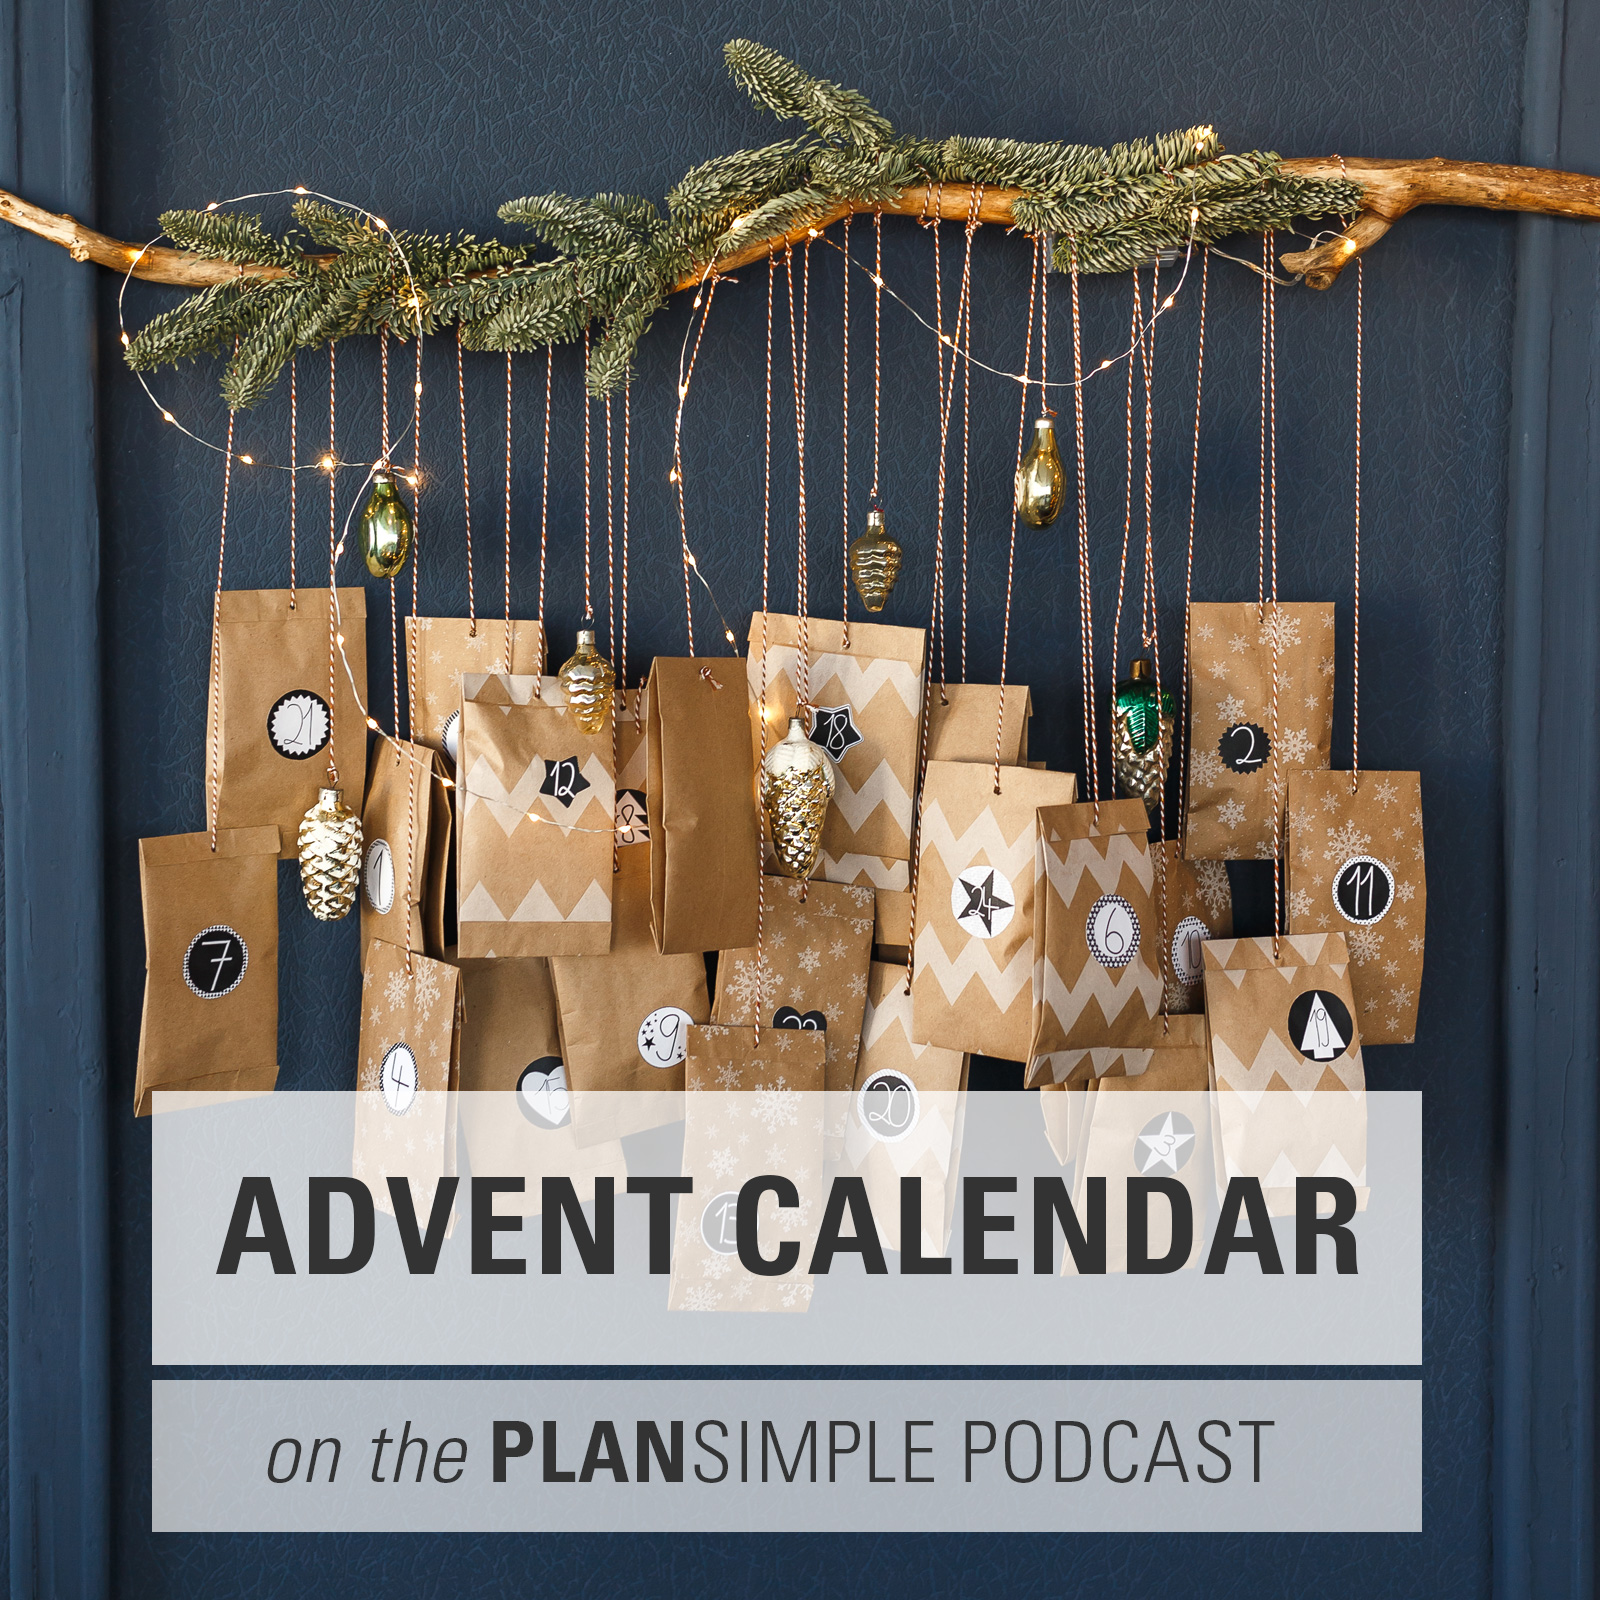 How To Make An Advent Calendar That Supports Your Family This December